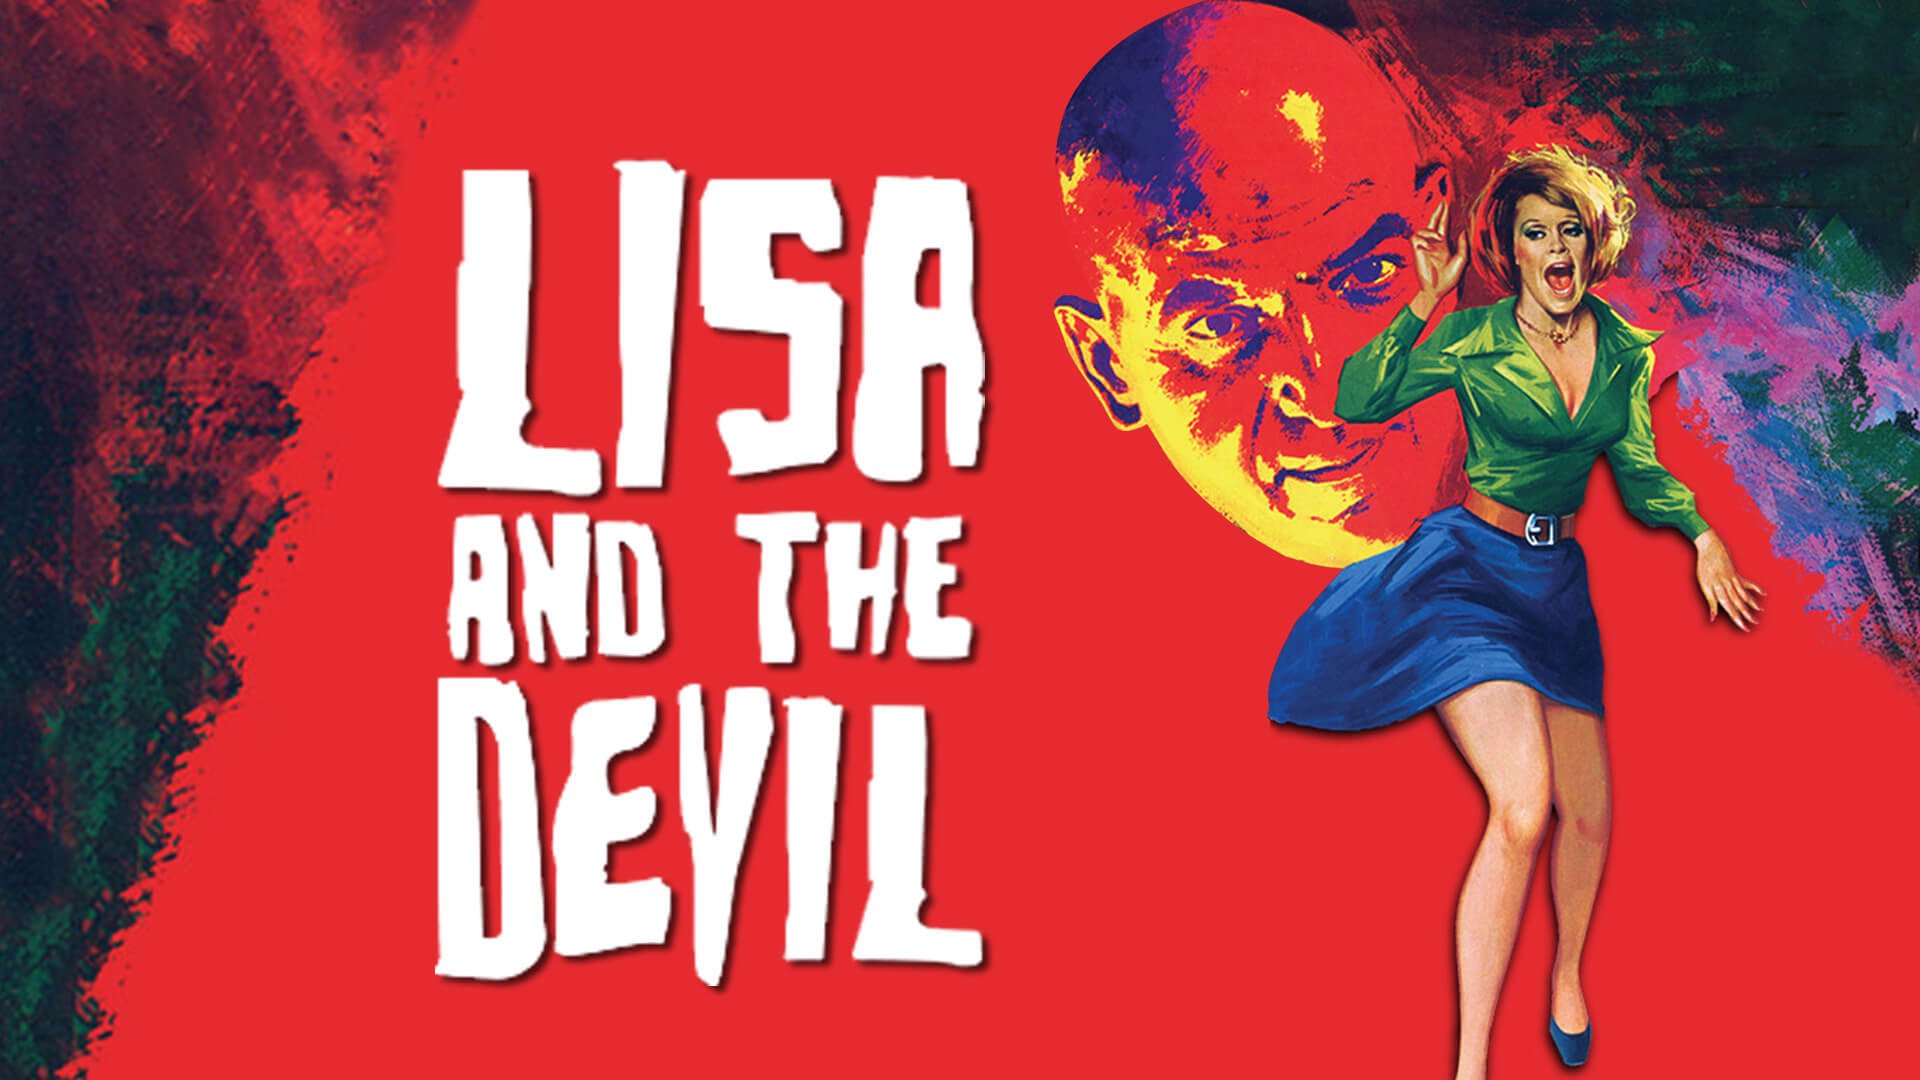 Lisa and the Devil 1974